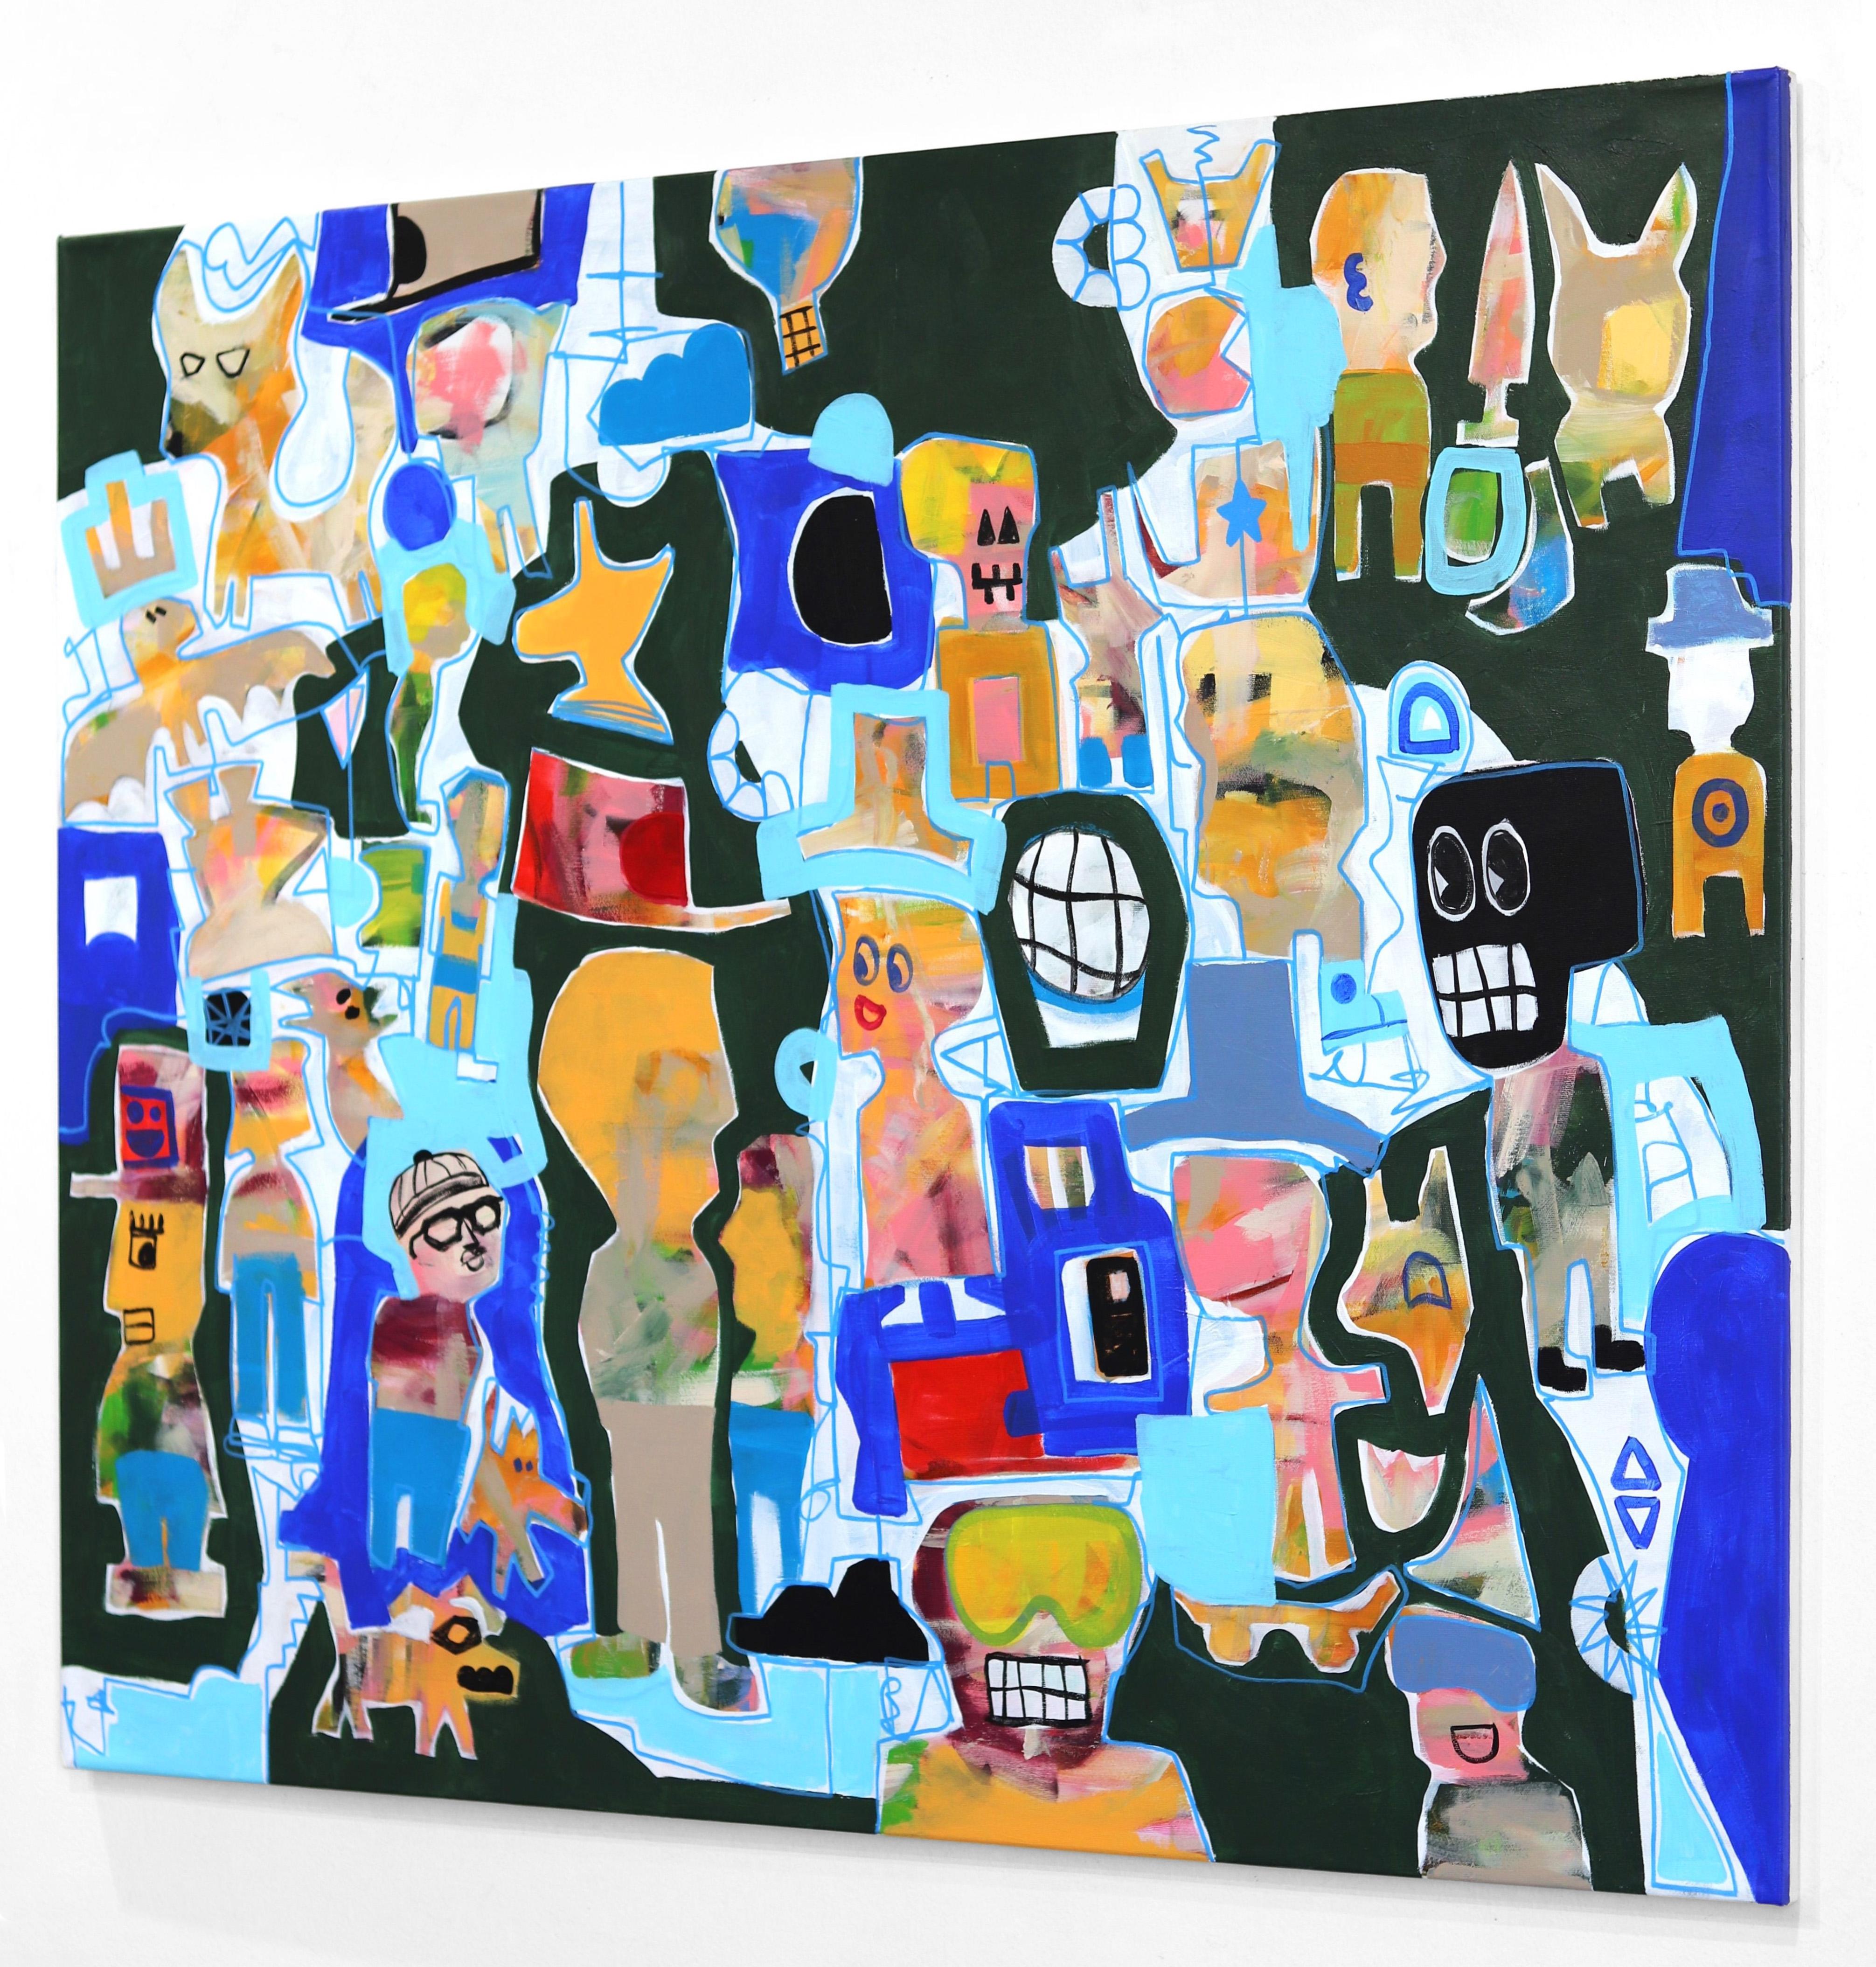 Urban abstract expressionism artist Tommy Lennartsson draws on the visual culture of street and pop art when creating his original vibrant mixed-media artworks. He employs a mix of abstract and figurative elements that give nods to